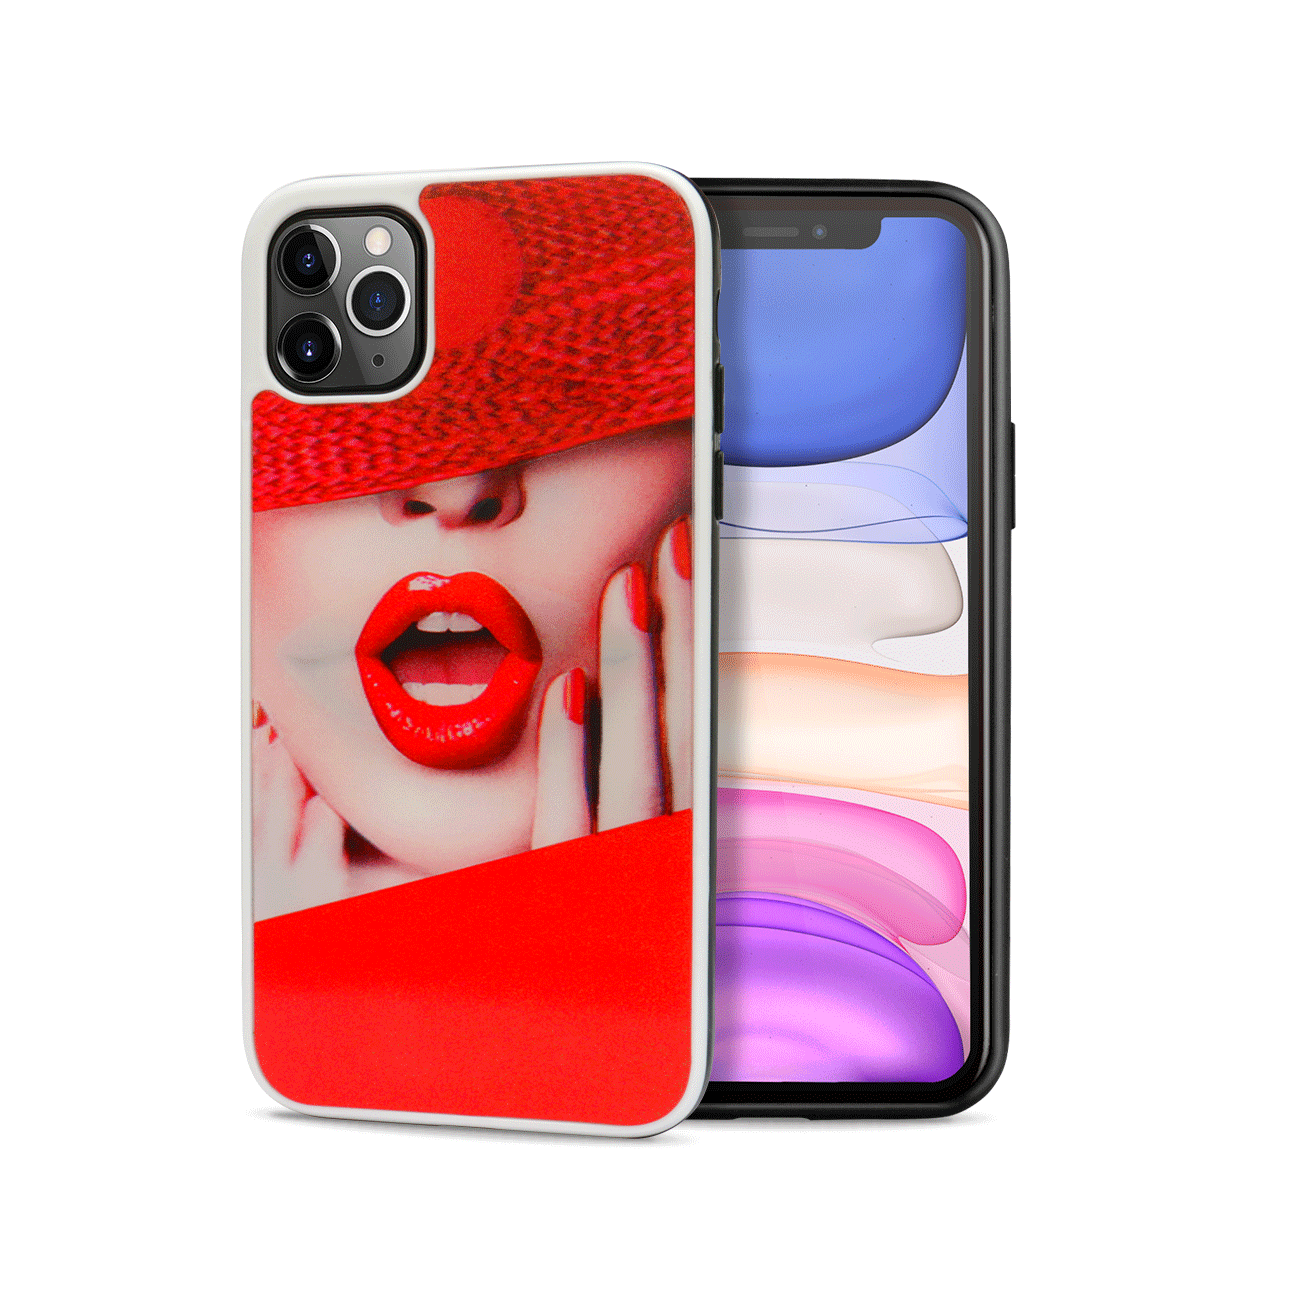 iPHONE 11 Pro Max (6.5in) 3D Dynamic Change Lenticular Design Case (Kiss)